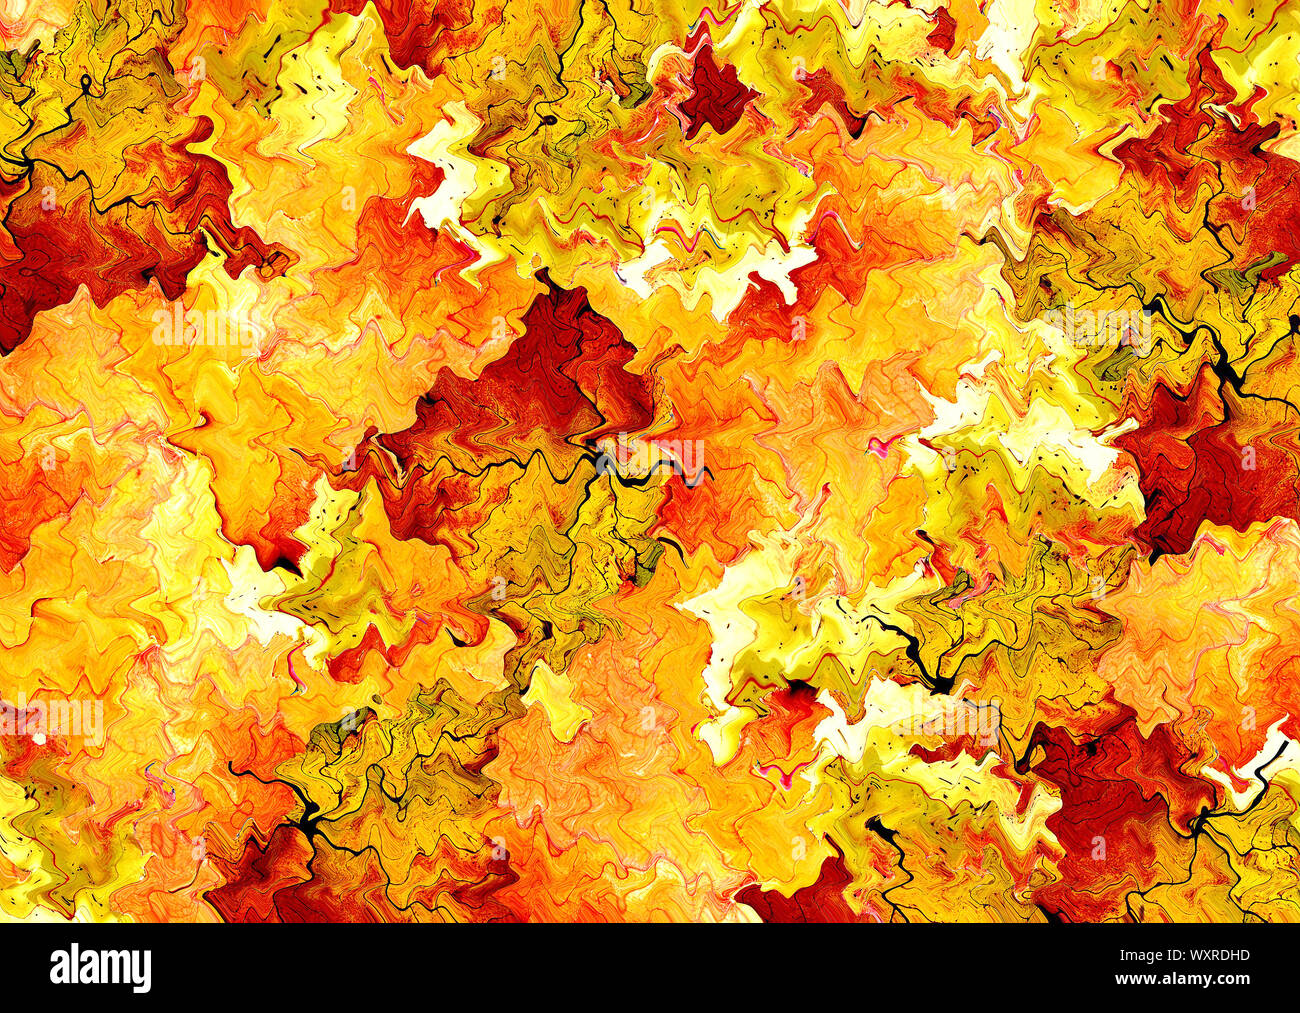 Abstract background of beautiful vibrant gold, orange and red leaves Stock Photo